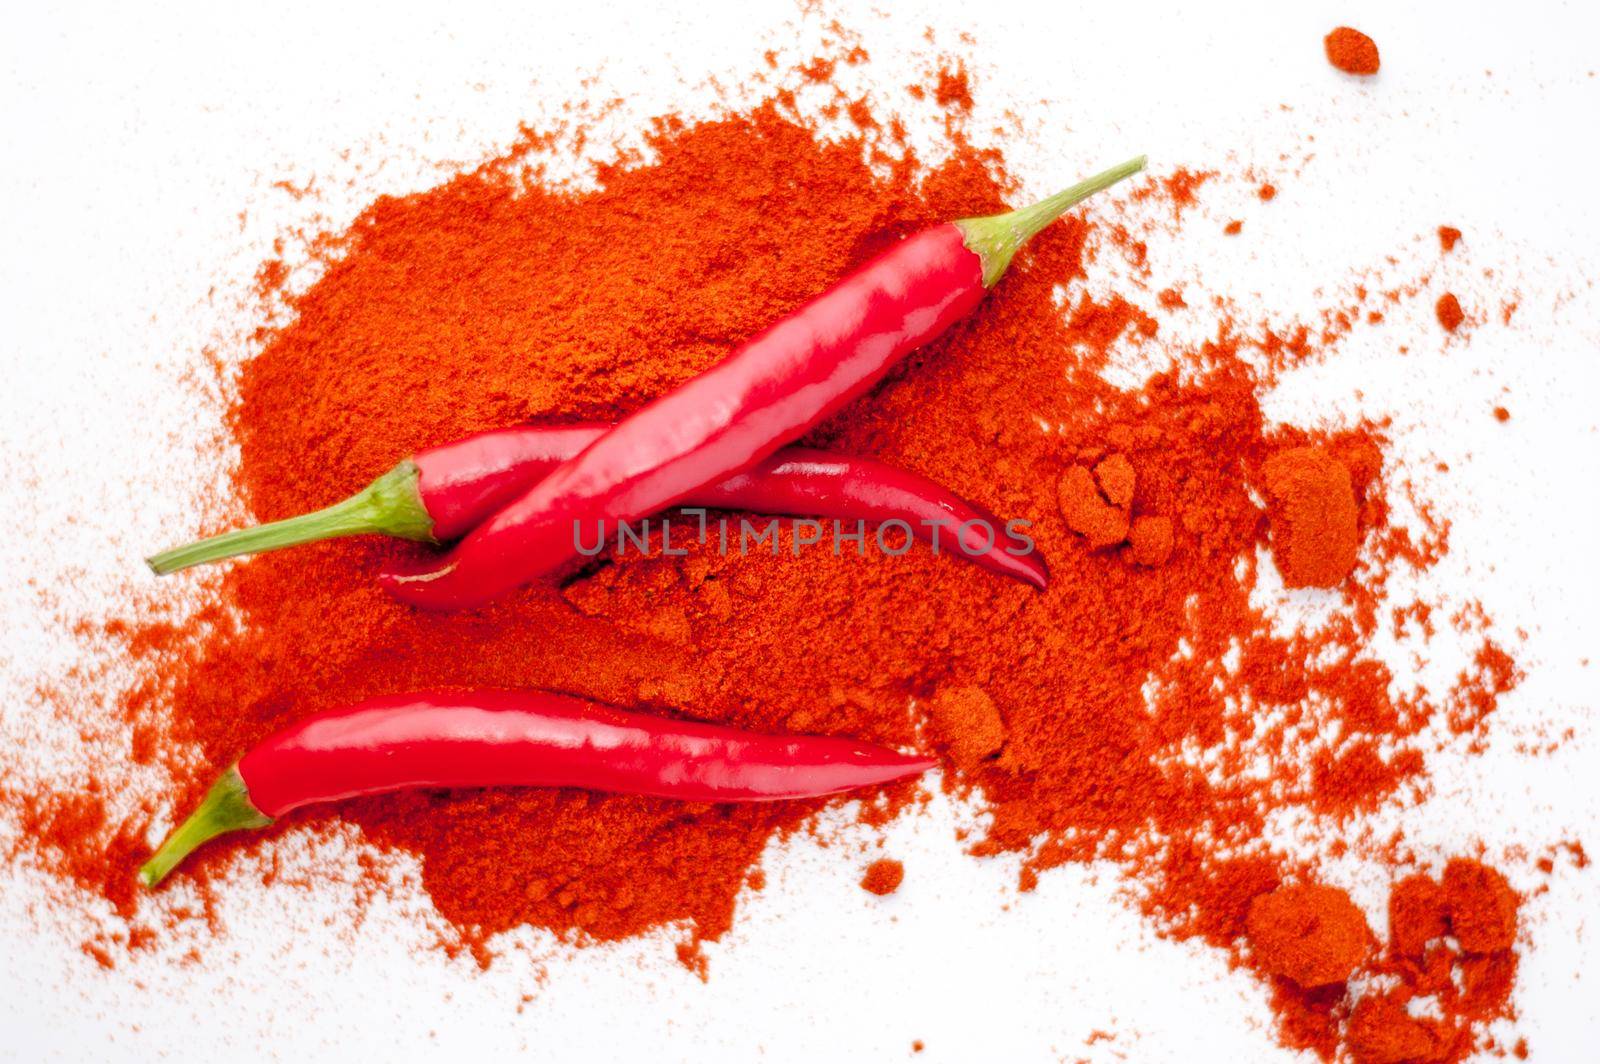 fresh red hot pepper and powder on a white background. High quality photo